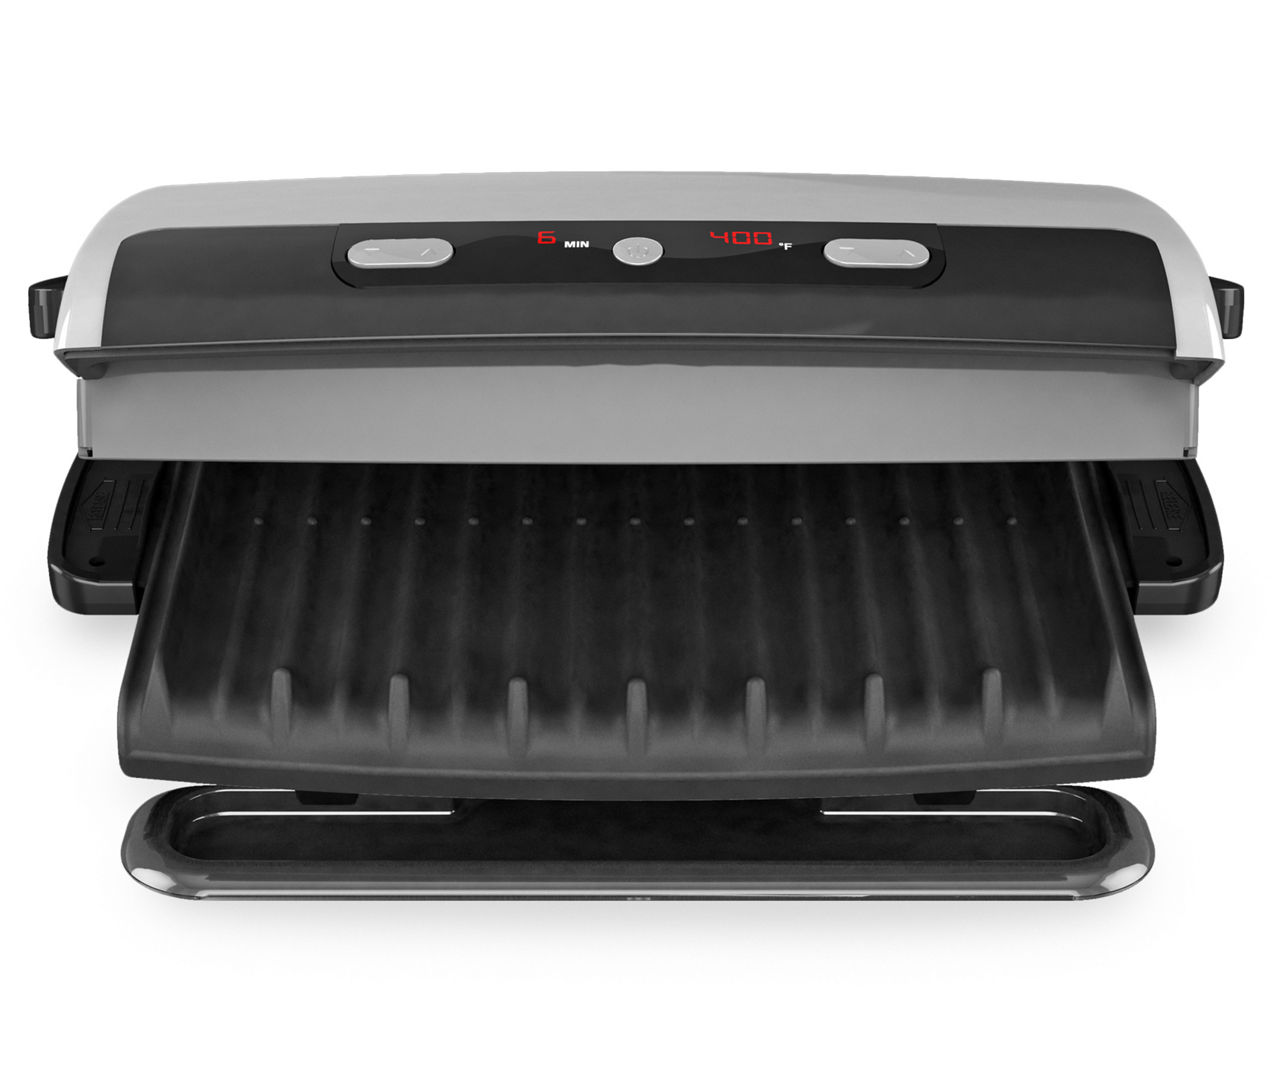 George Foreman 6-Serving Grill